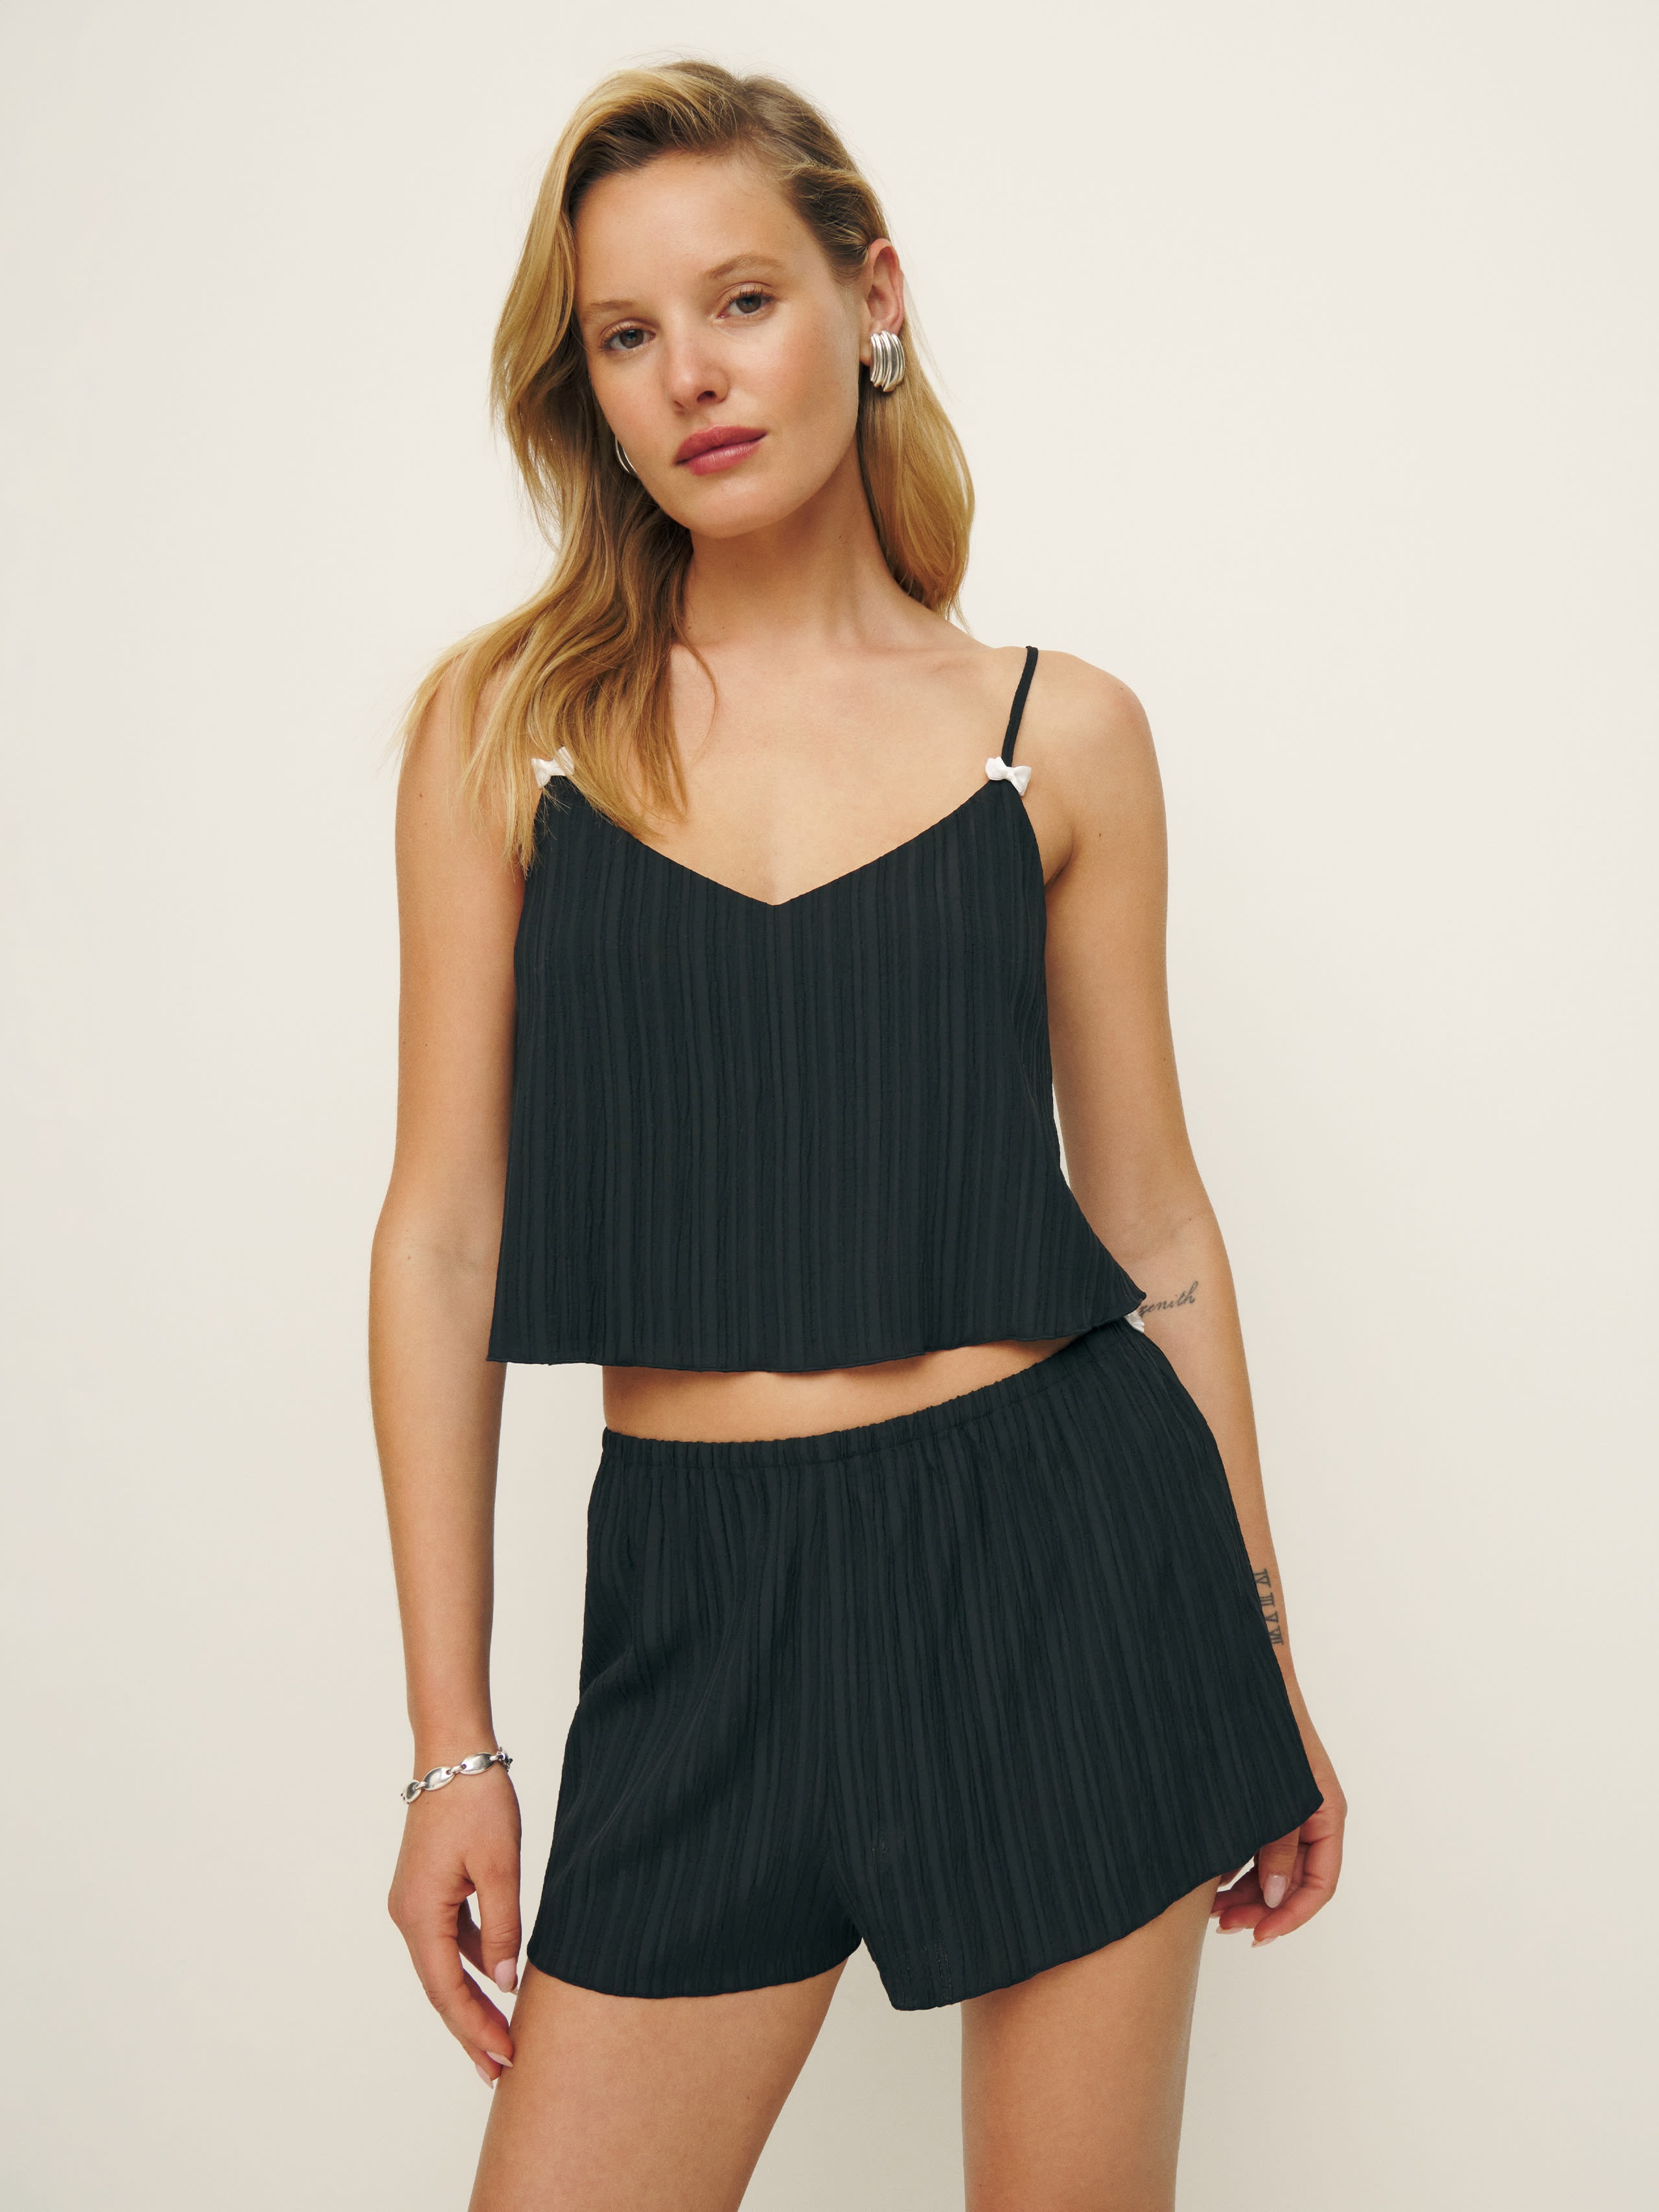 Reformation Mallory Two Piece